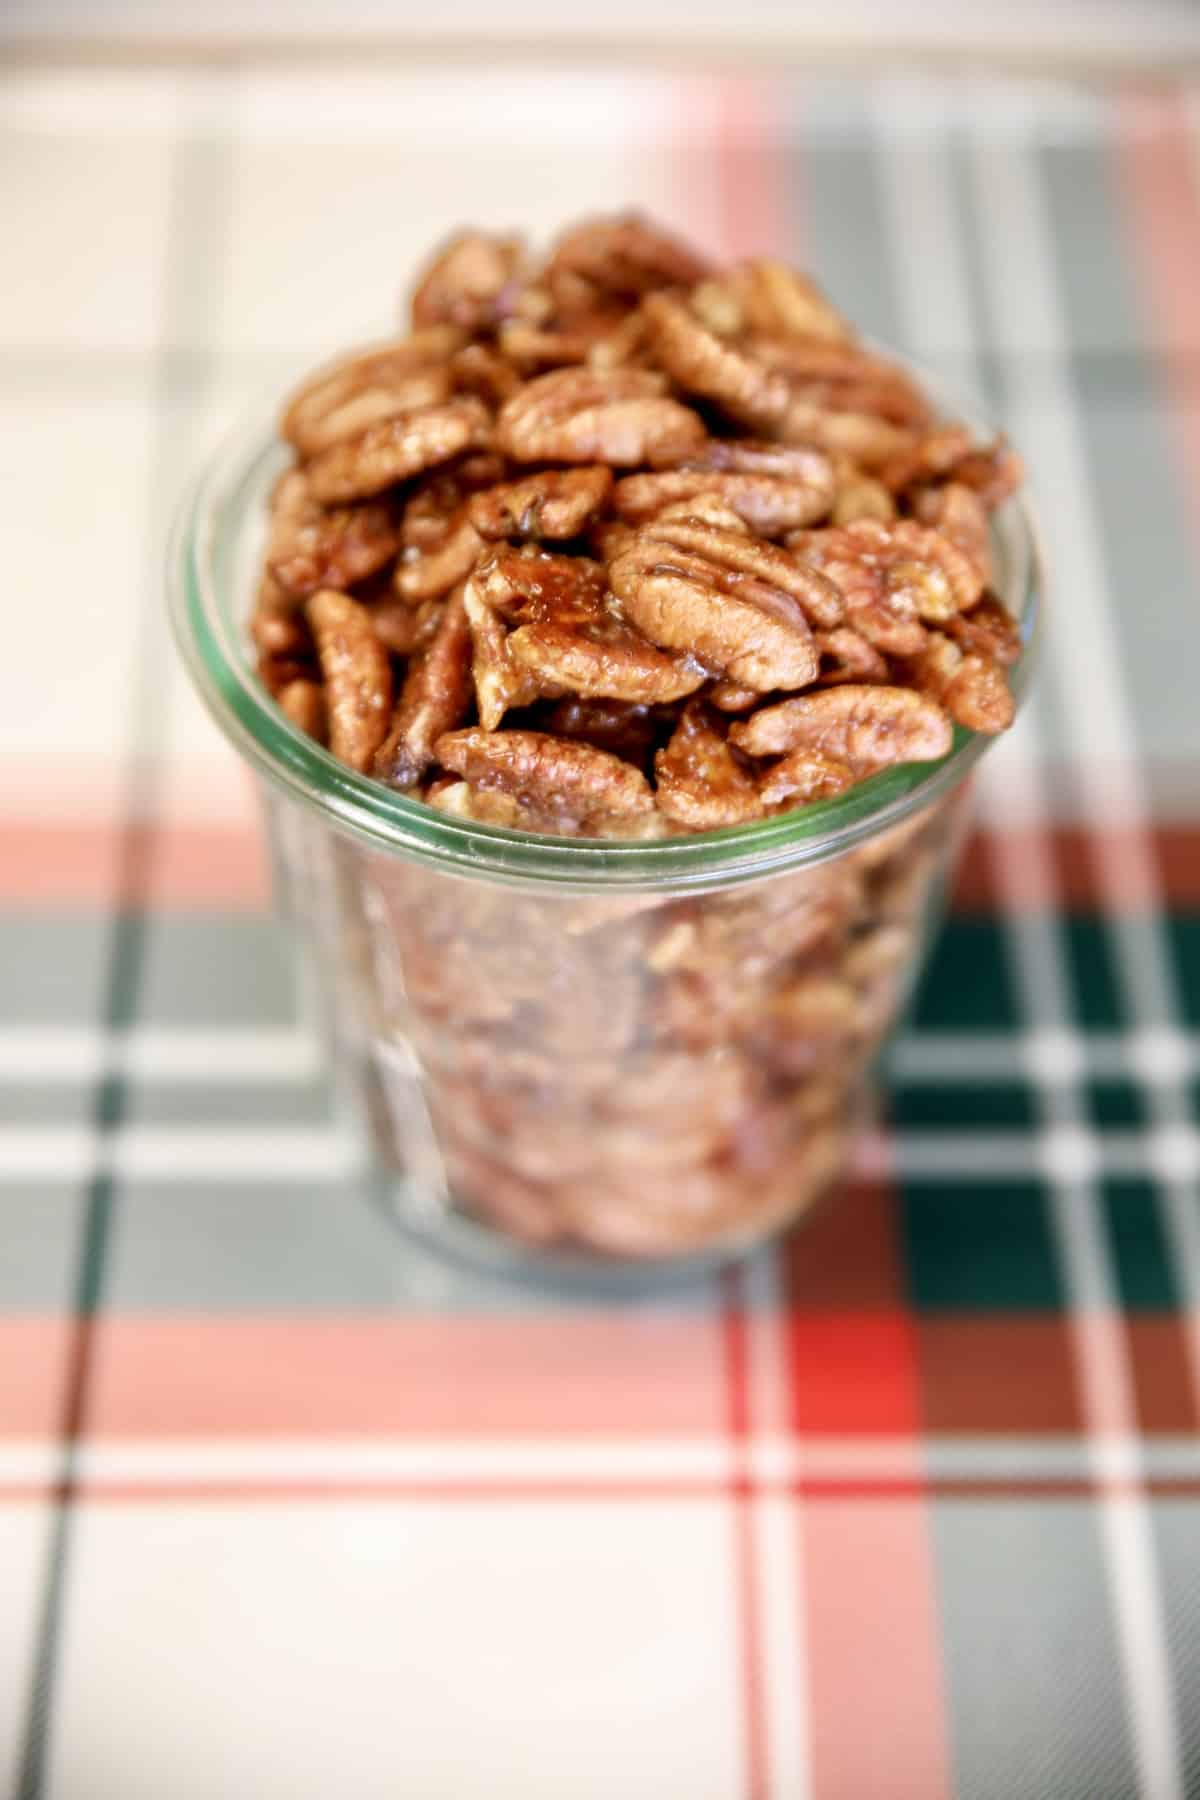 Jar of candied pecans on a plaid tray.